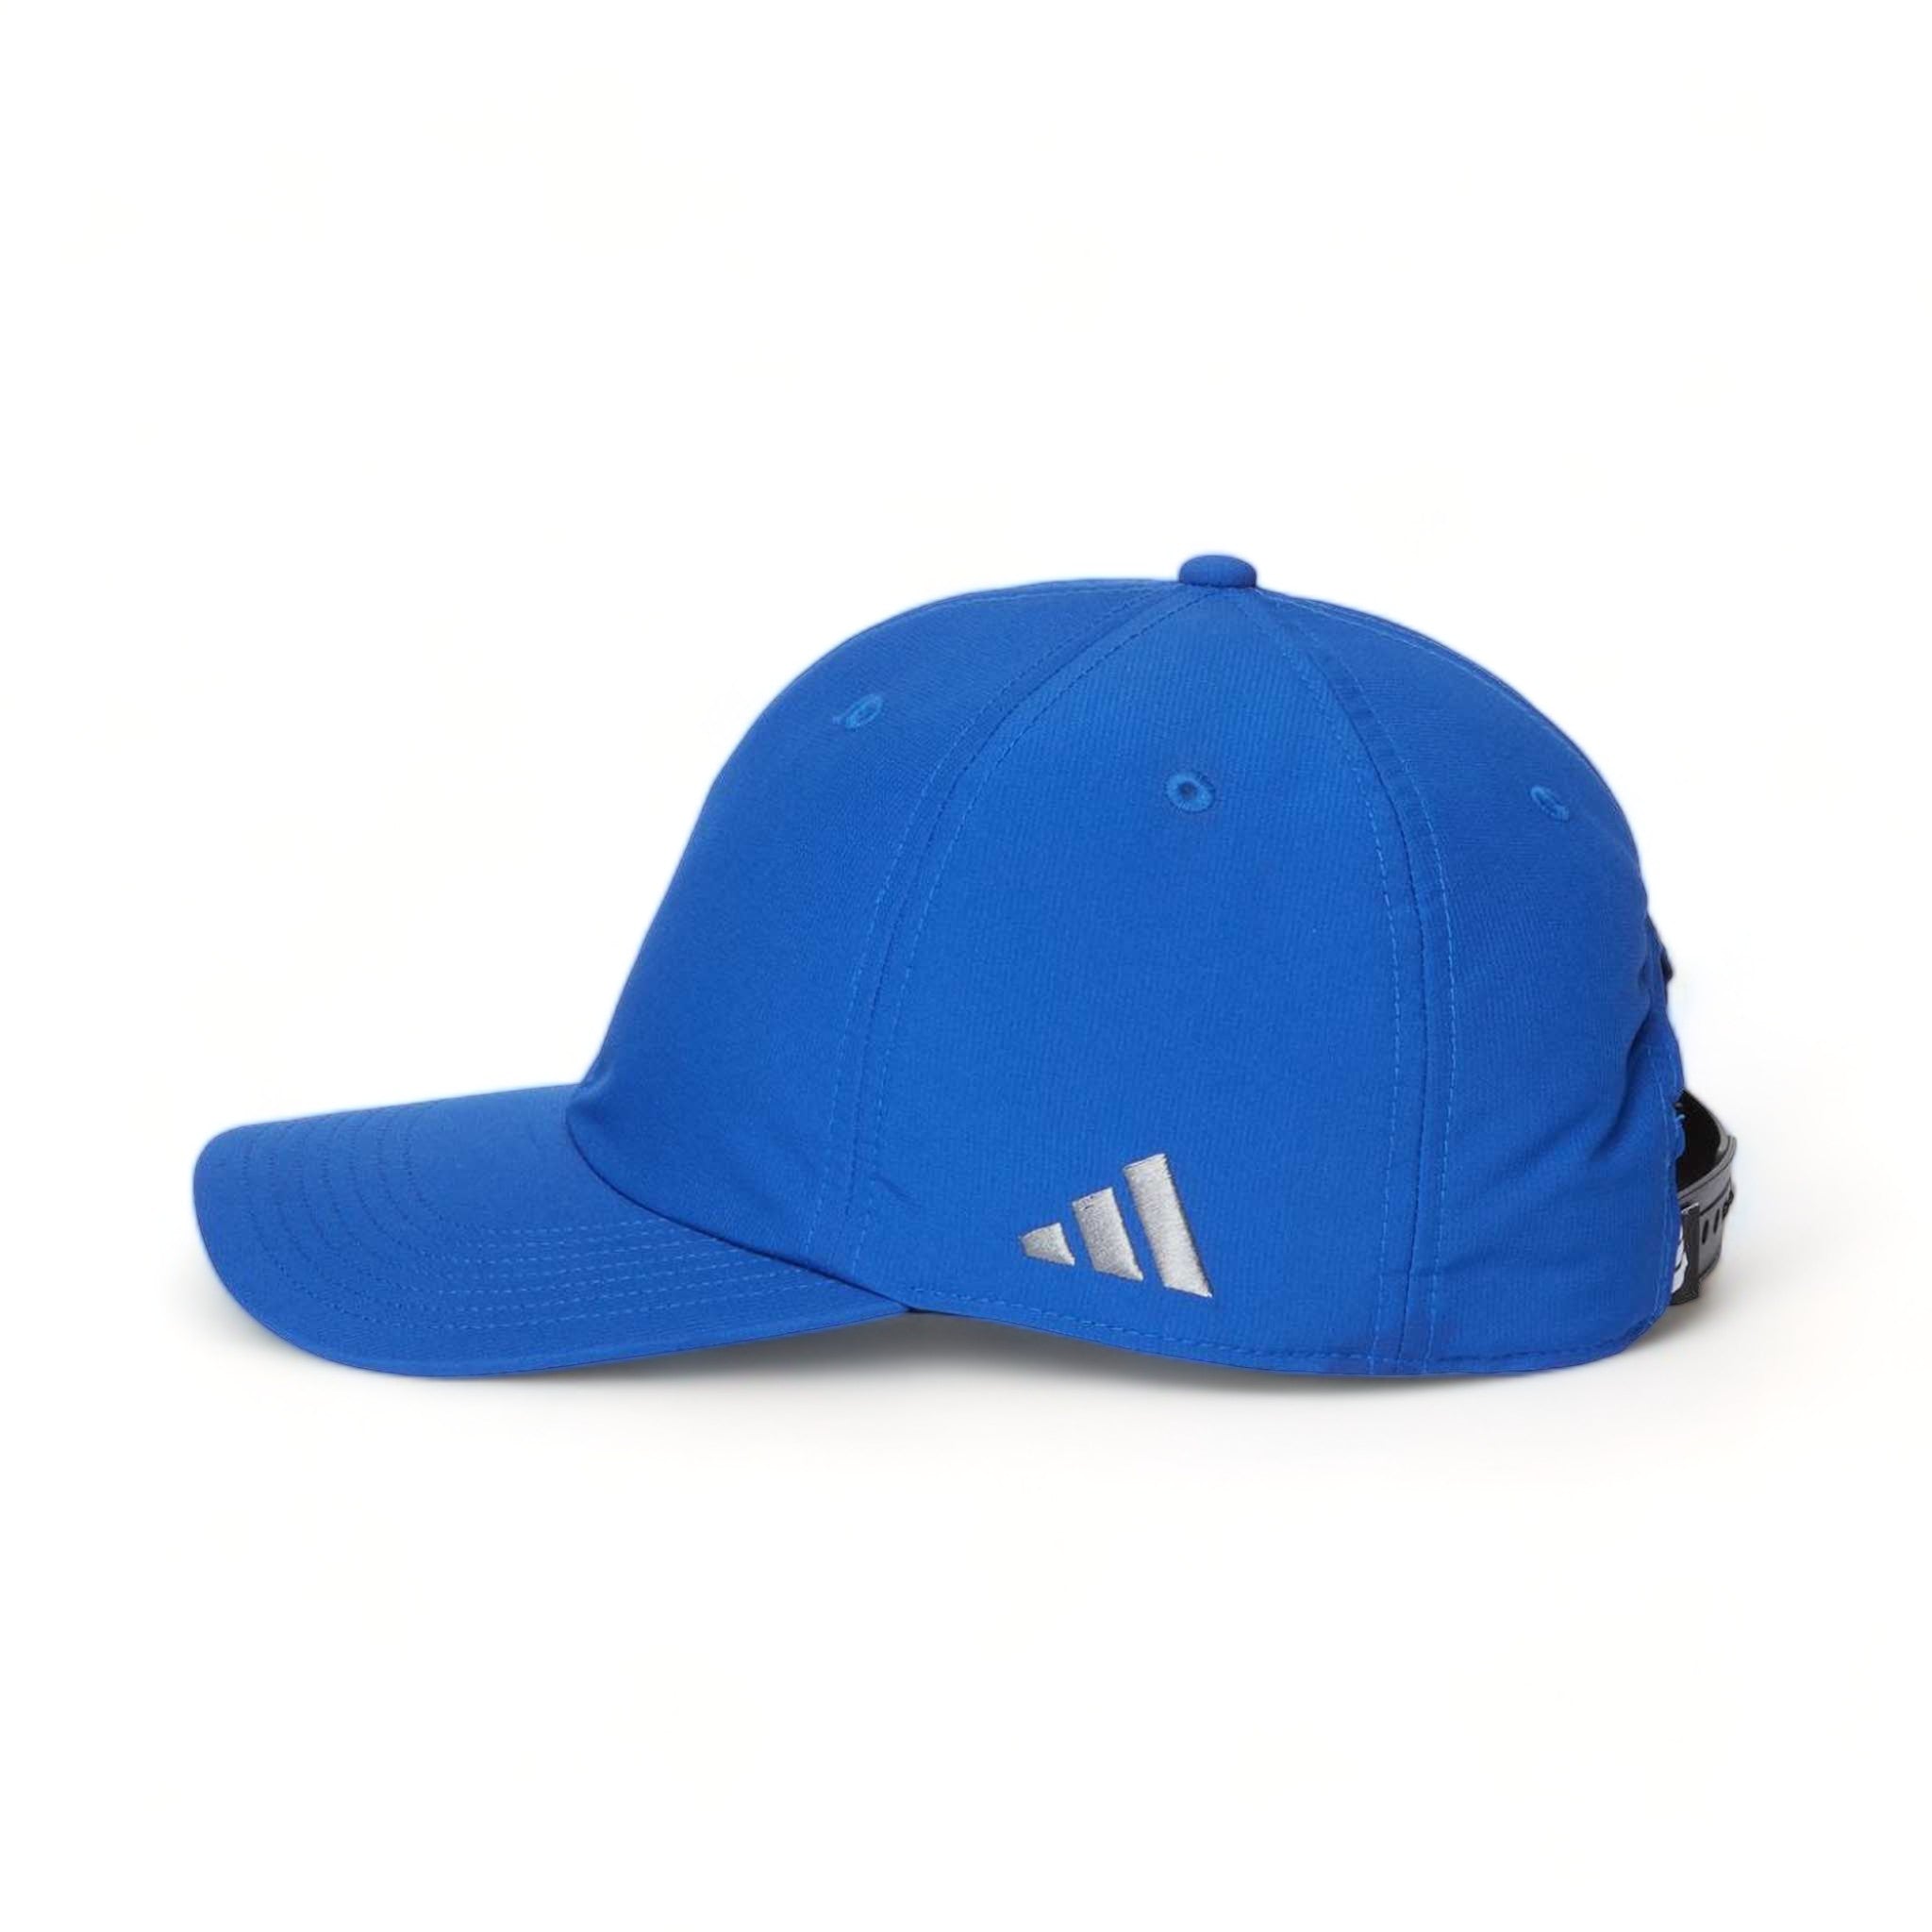 Side view of Adidas A600S custom hat in collegiate royal